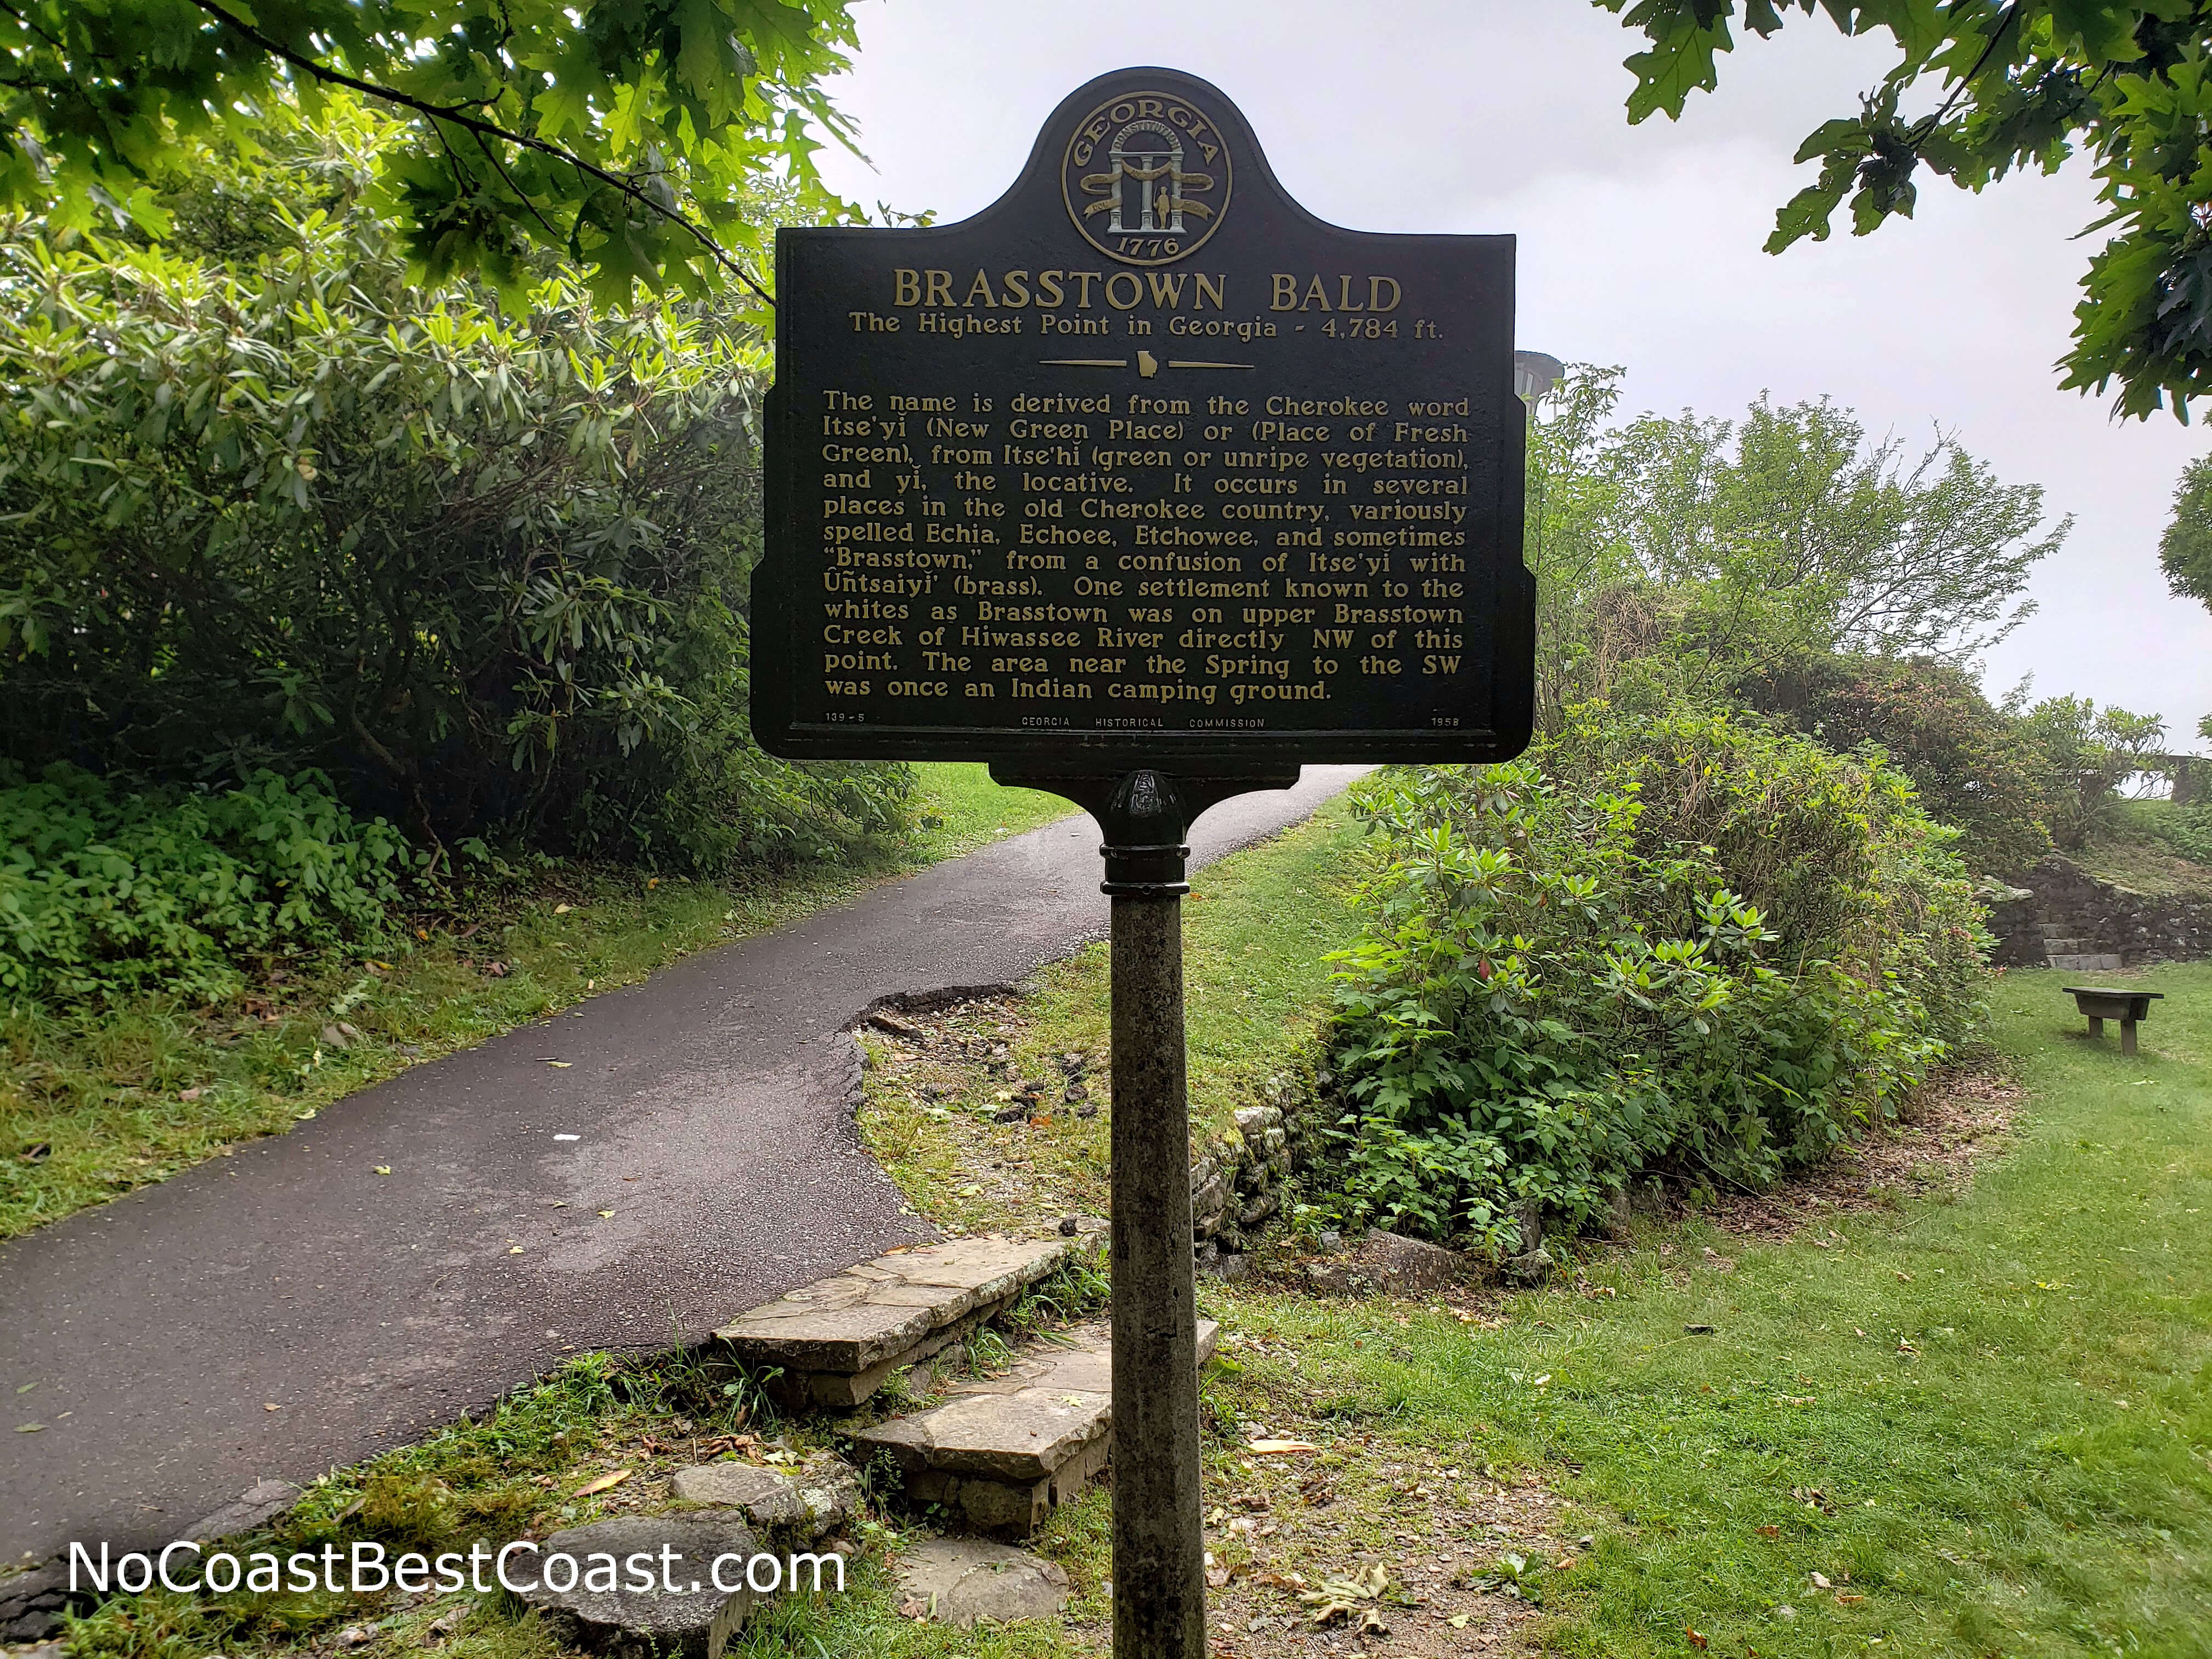 The sign marking the summit of Brasstown Bald